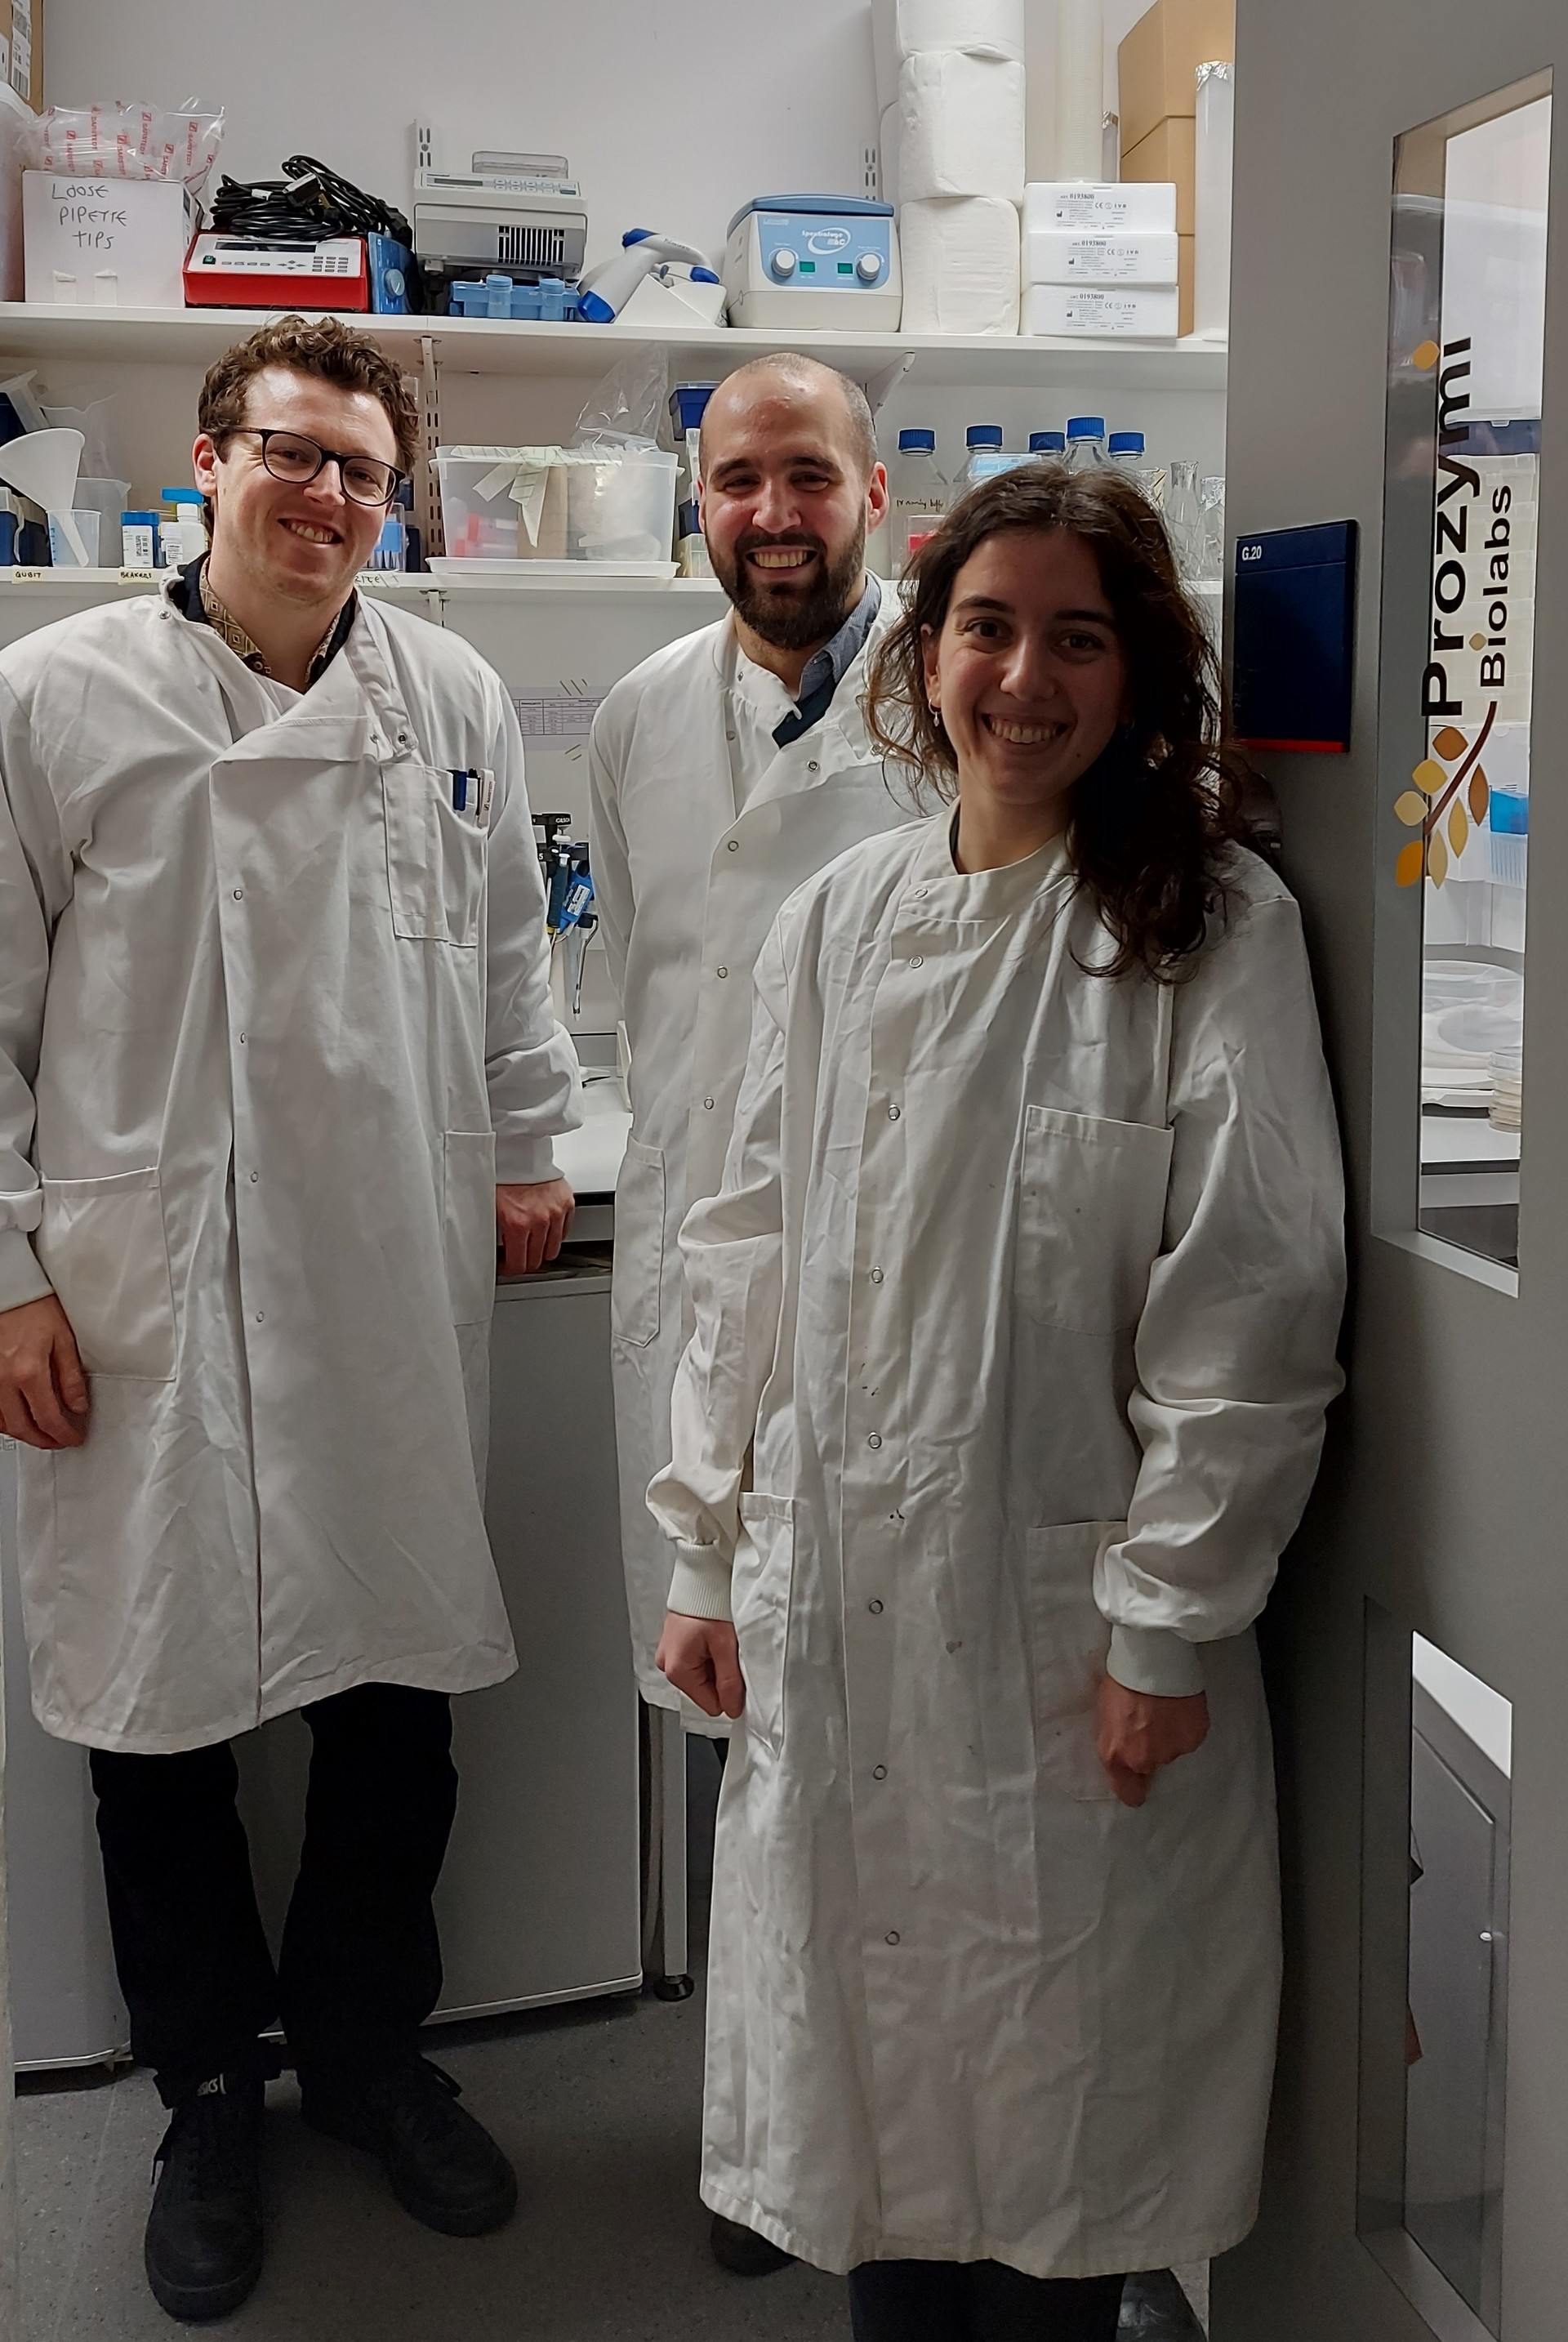 Lead scientist Austin Burroughs (left), co-founder Ioannis Stasinopolous (middle), COO and co-founder Niki Christopoulou (right).